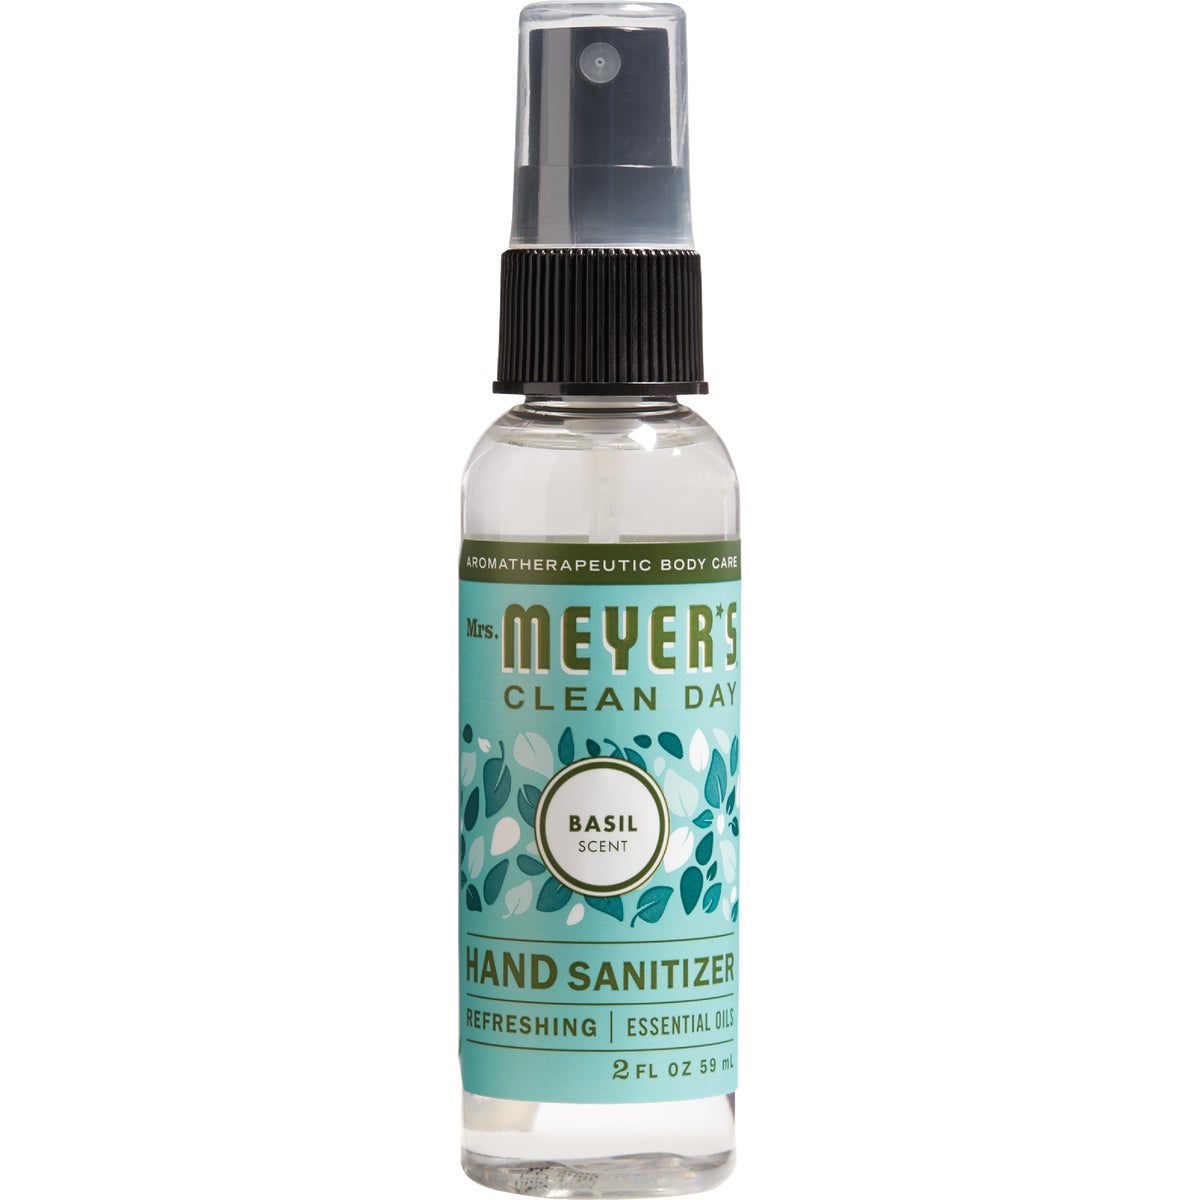 Item 616216, Hand sanitizer cleans and freshens hands, even when you're nowhere near 